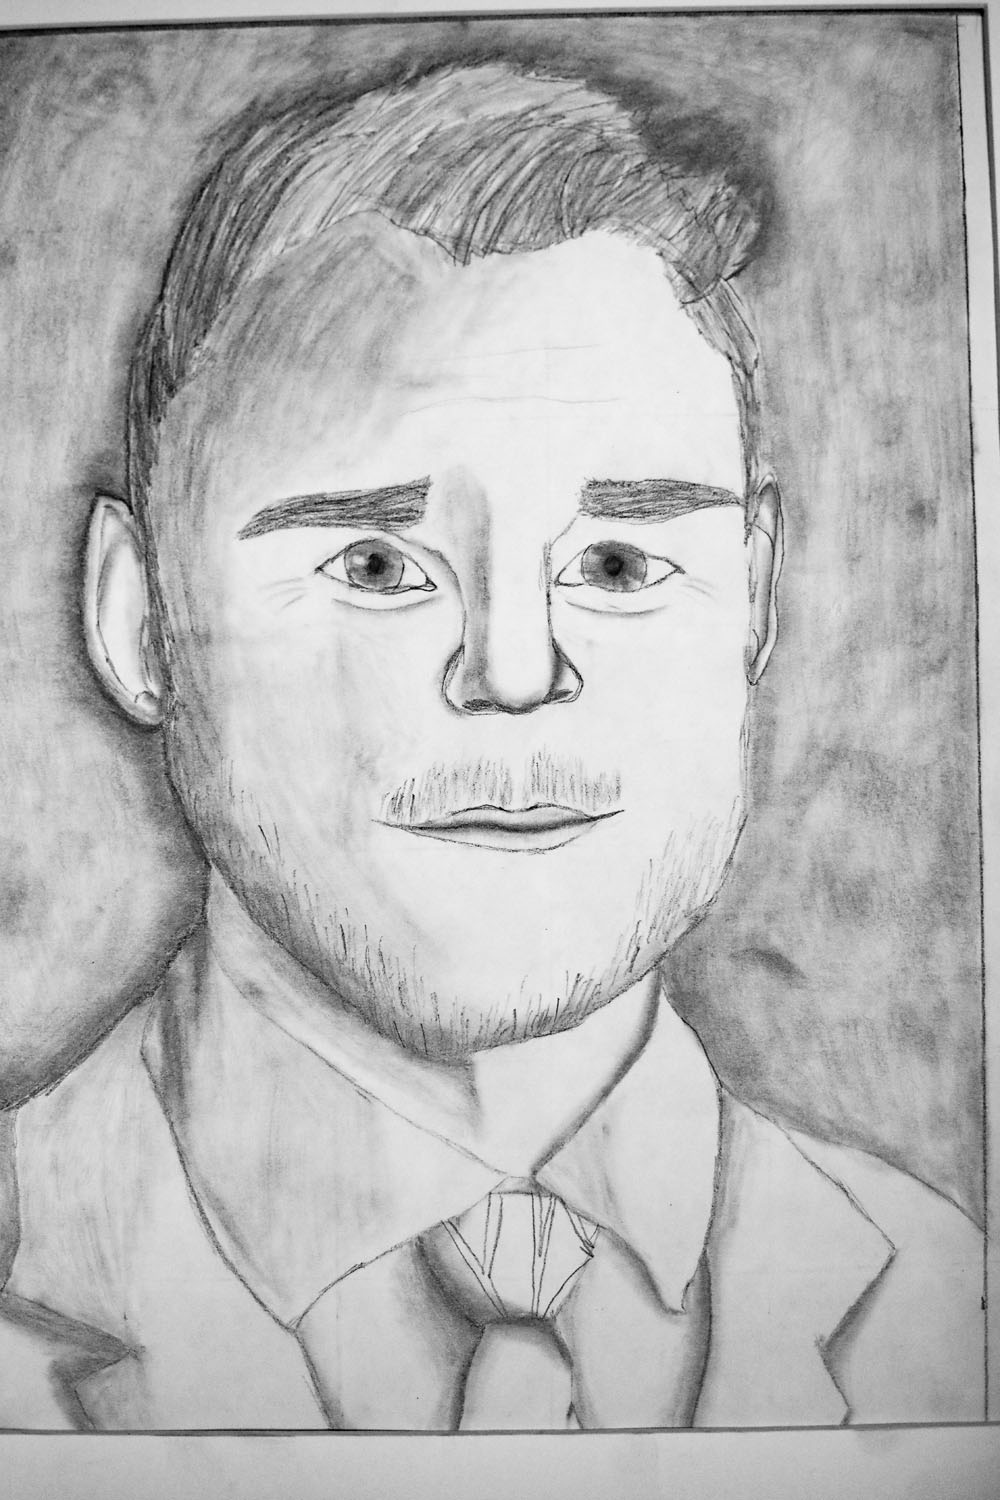 Pencil drawing of a man in suit and tie